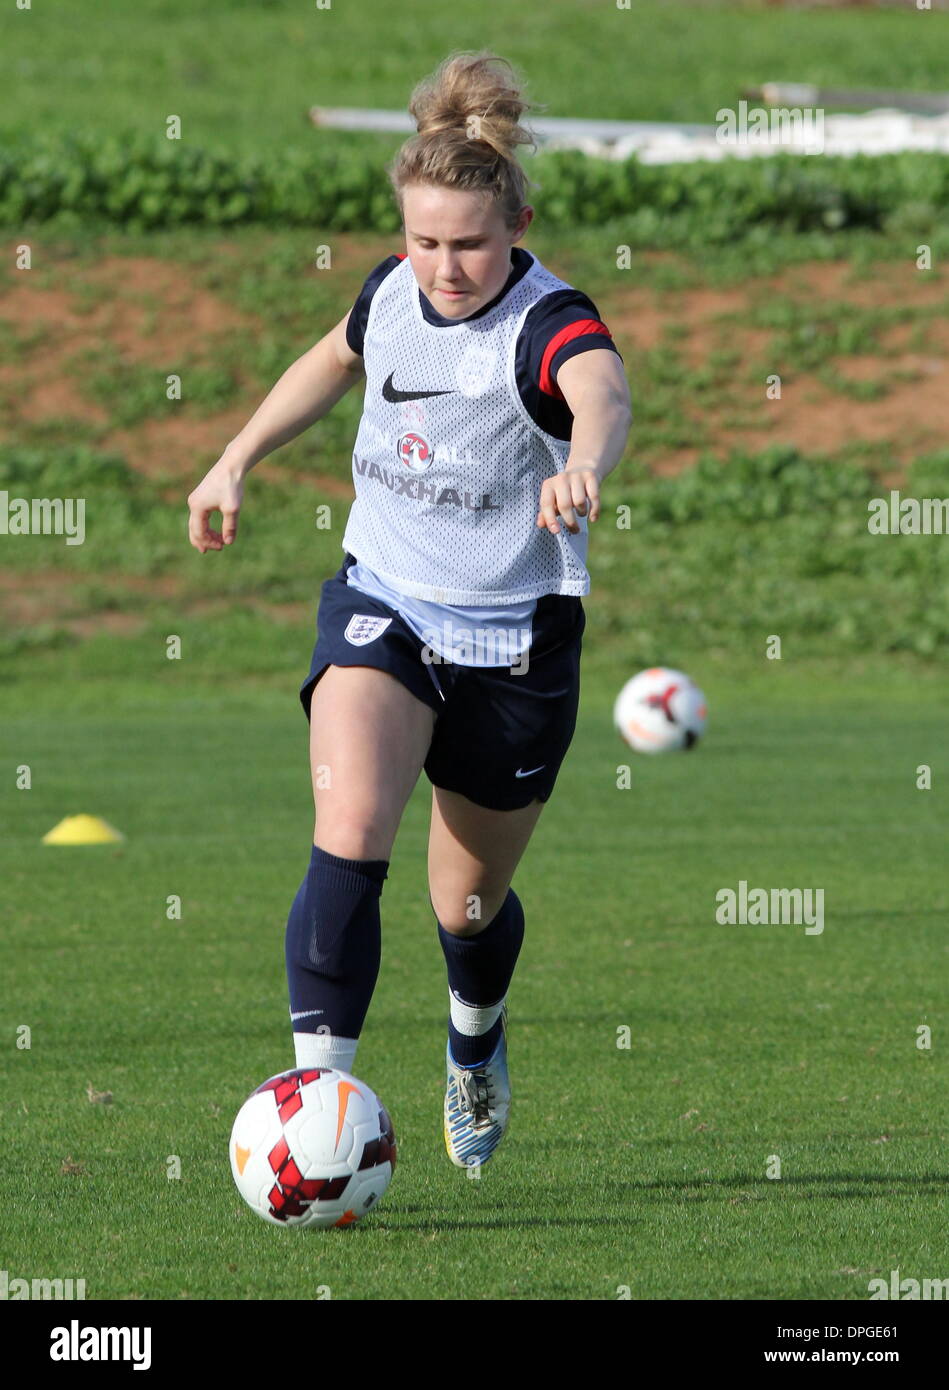 La Manga Club, Spain. 14th Jan, 2014.  England Women's Football team are put through their paces in training by new Head Coach Mark Sampson ahead of their International Friendly against Norway on Thursday. Ph Credit:  Tony Henshaw/Alamy Live News Stock Photo